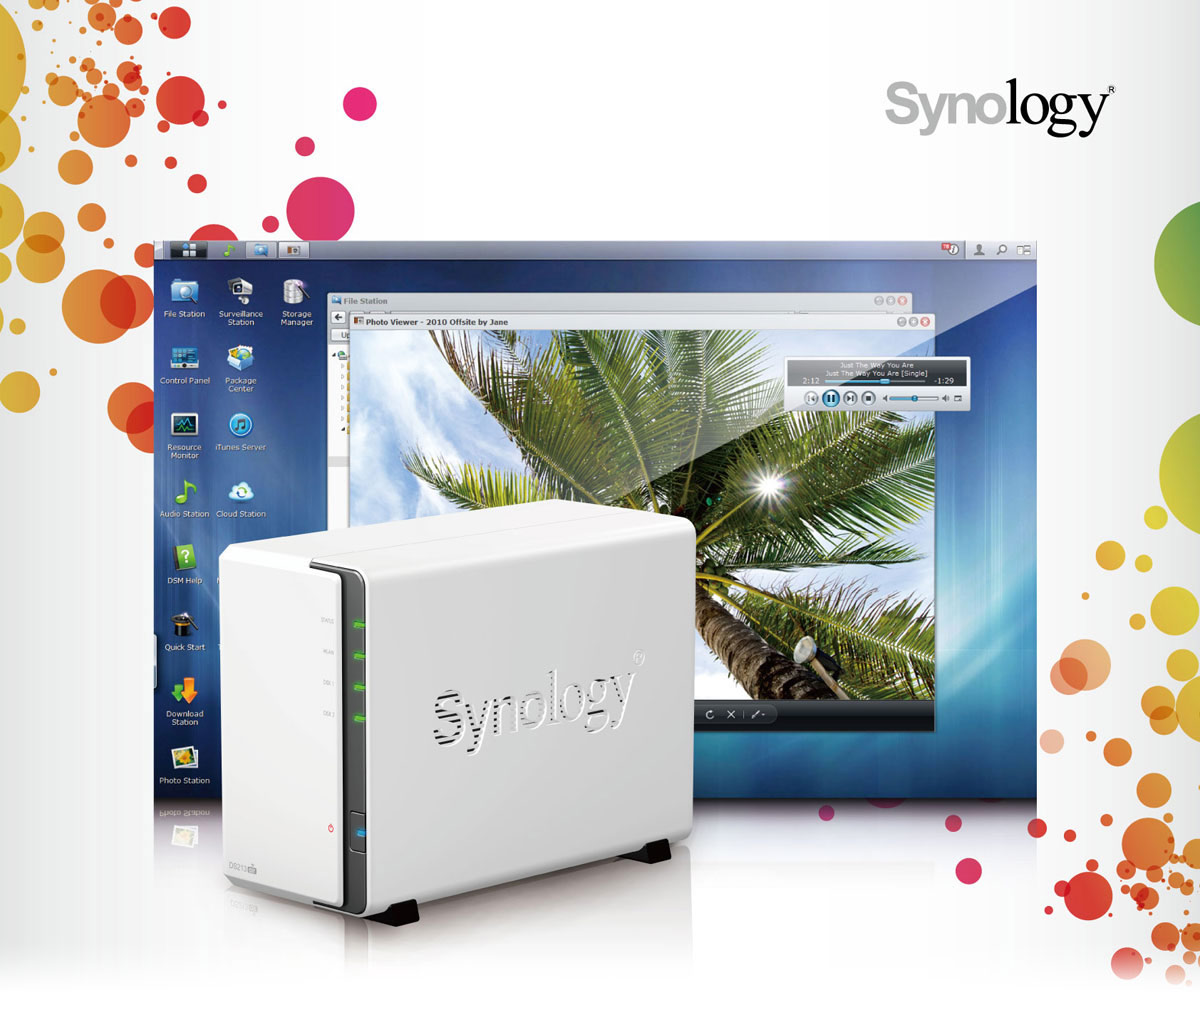 Best pricing for Synology in Australia